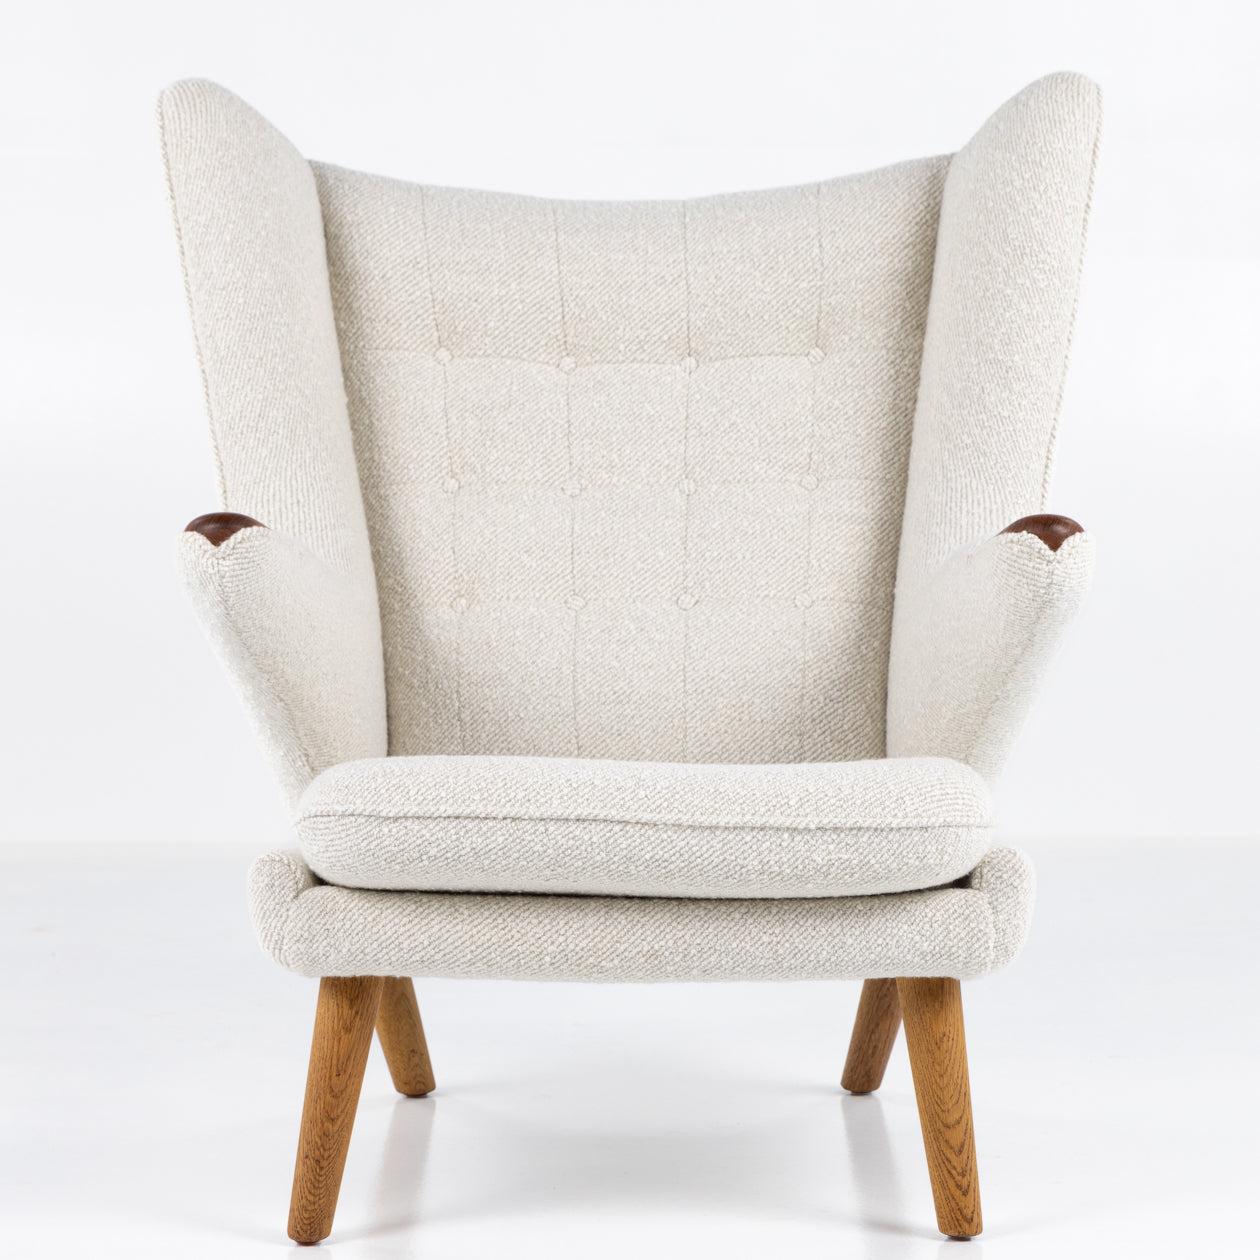 AP 19 - Reupholstered Papa Bear chair with matching stool in light textile (A Joy by Dedar, colour 002 Natural)

ABOUT THE FURNITURE: This is an original 'Papa Bear chair' by Hans J. Wegner, produced by the original manufacturer; AP Stolen. The